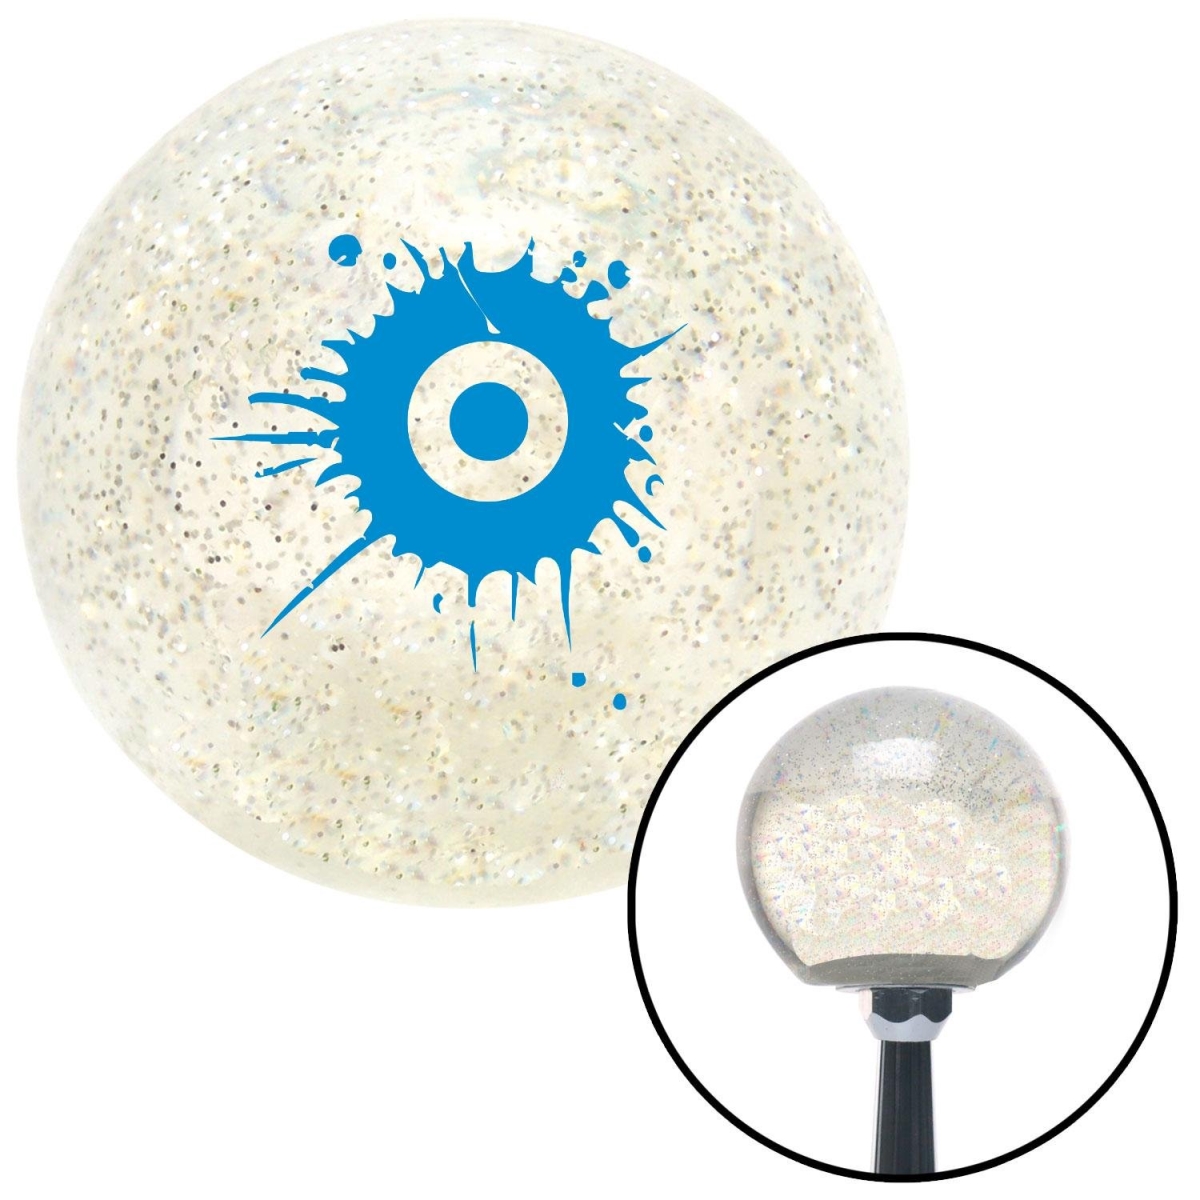 American Shifter 91894 Blue Target with Splatter Clear Metal Flake Shift Knob with M16 x 1.5 Insert Shifter -  American Shifter Company